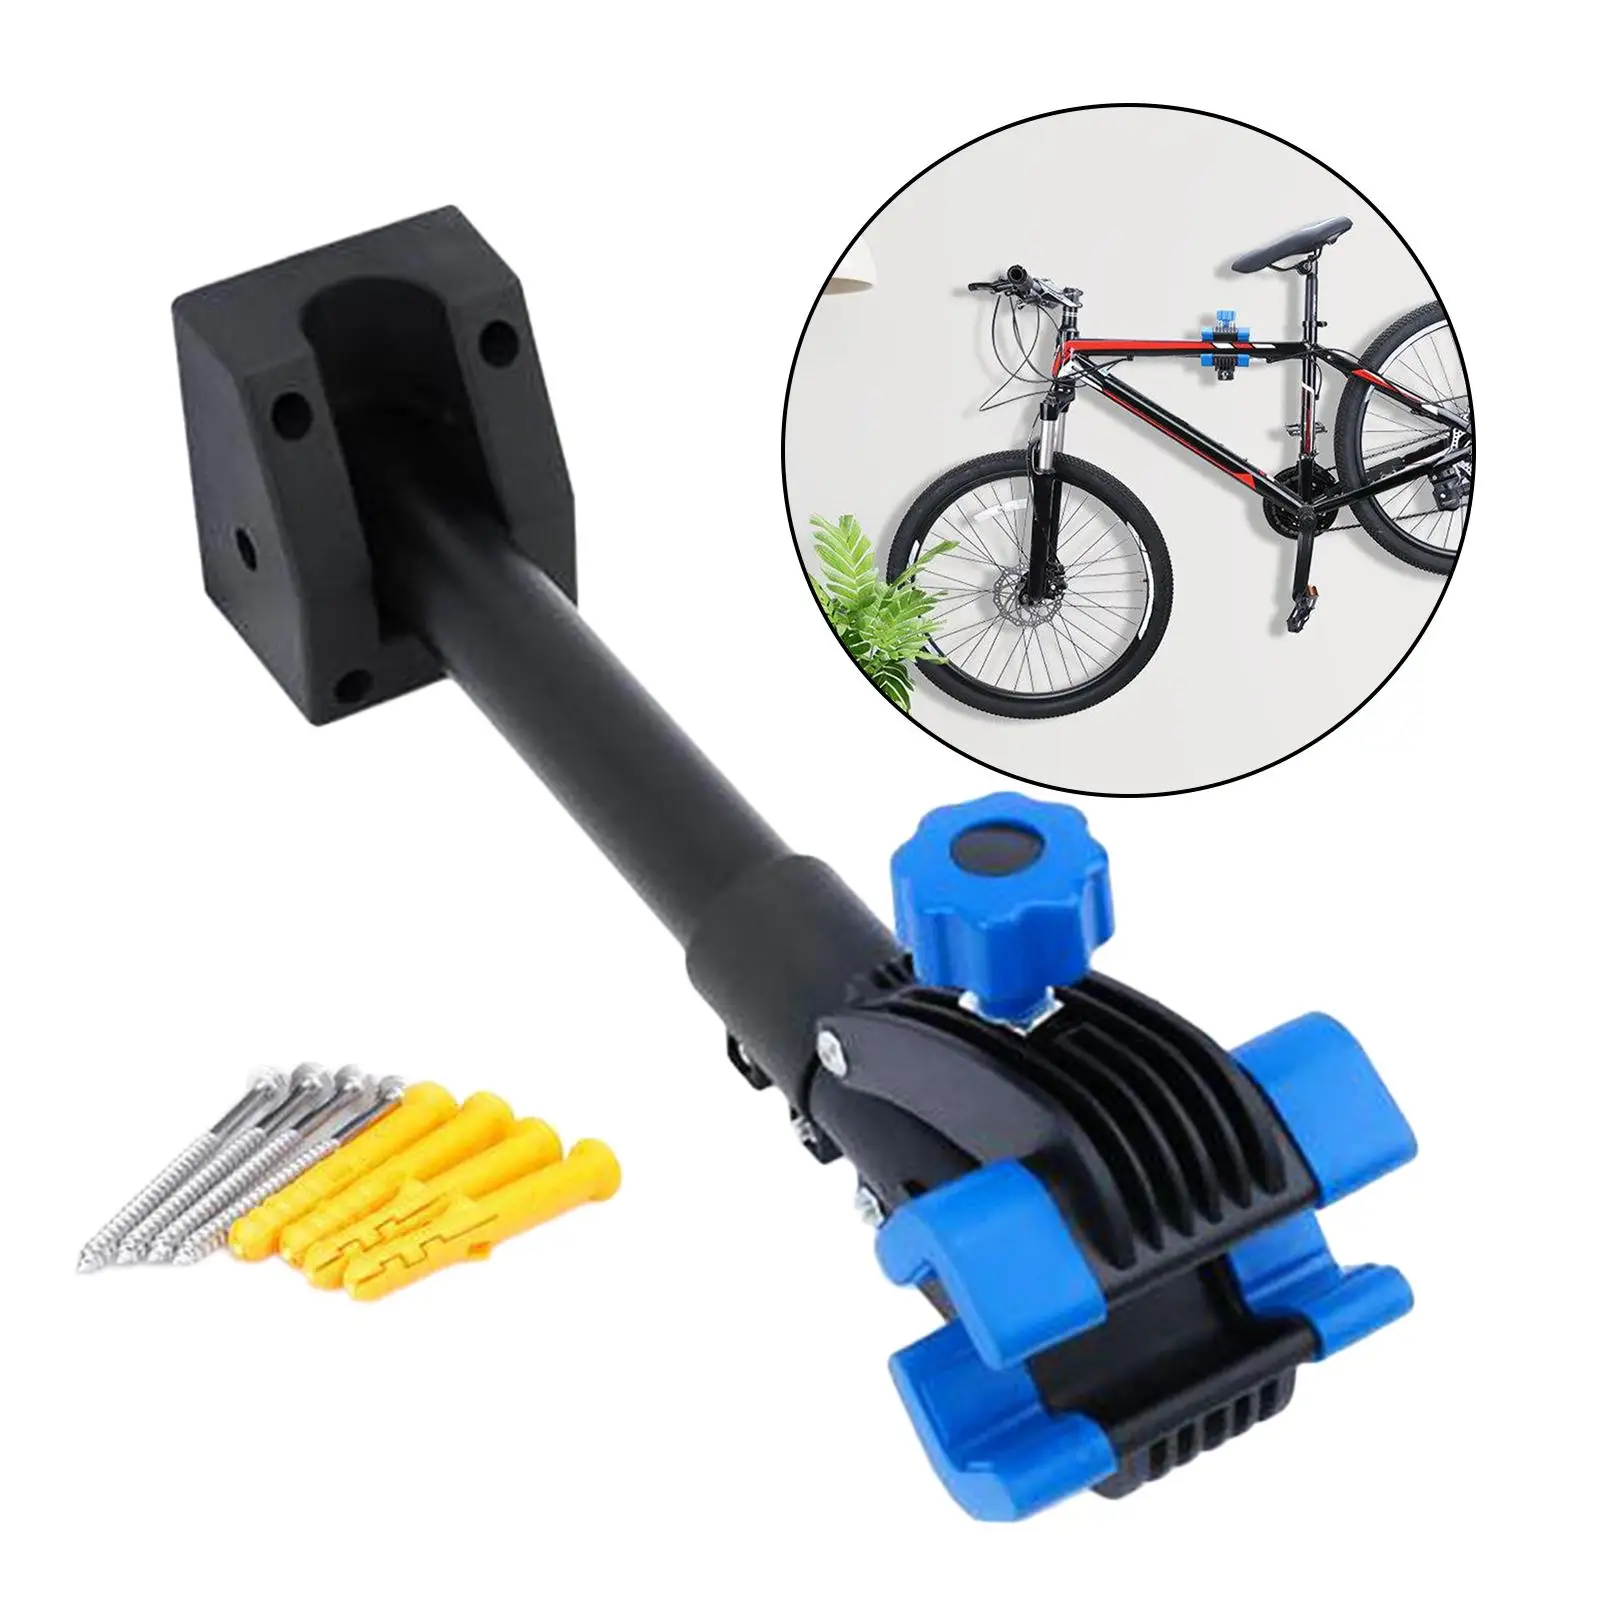 Folding Mount Foldable Bicycle Stand Clamp Hanger Mechanic Repair Tool